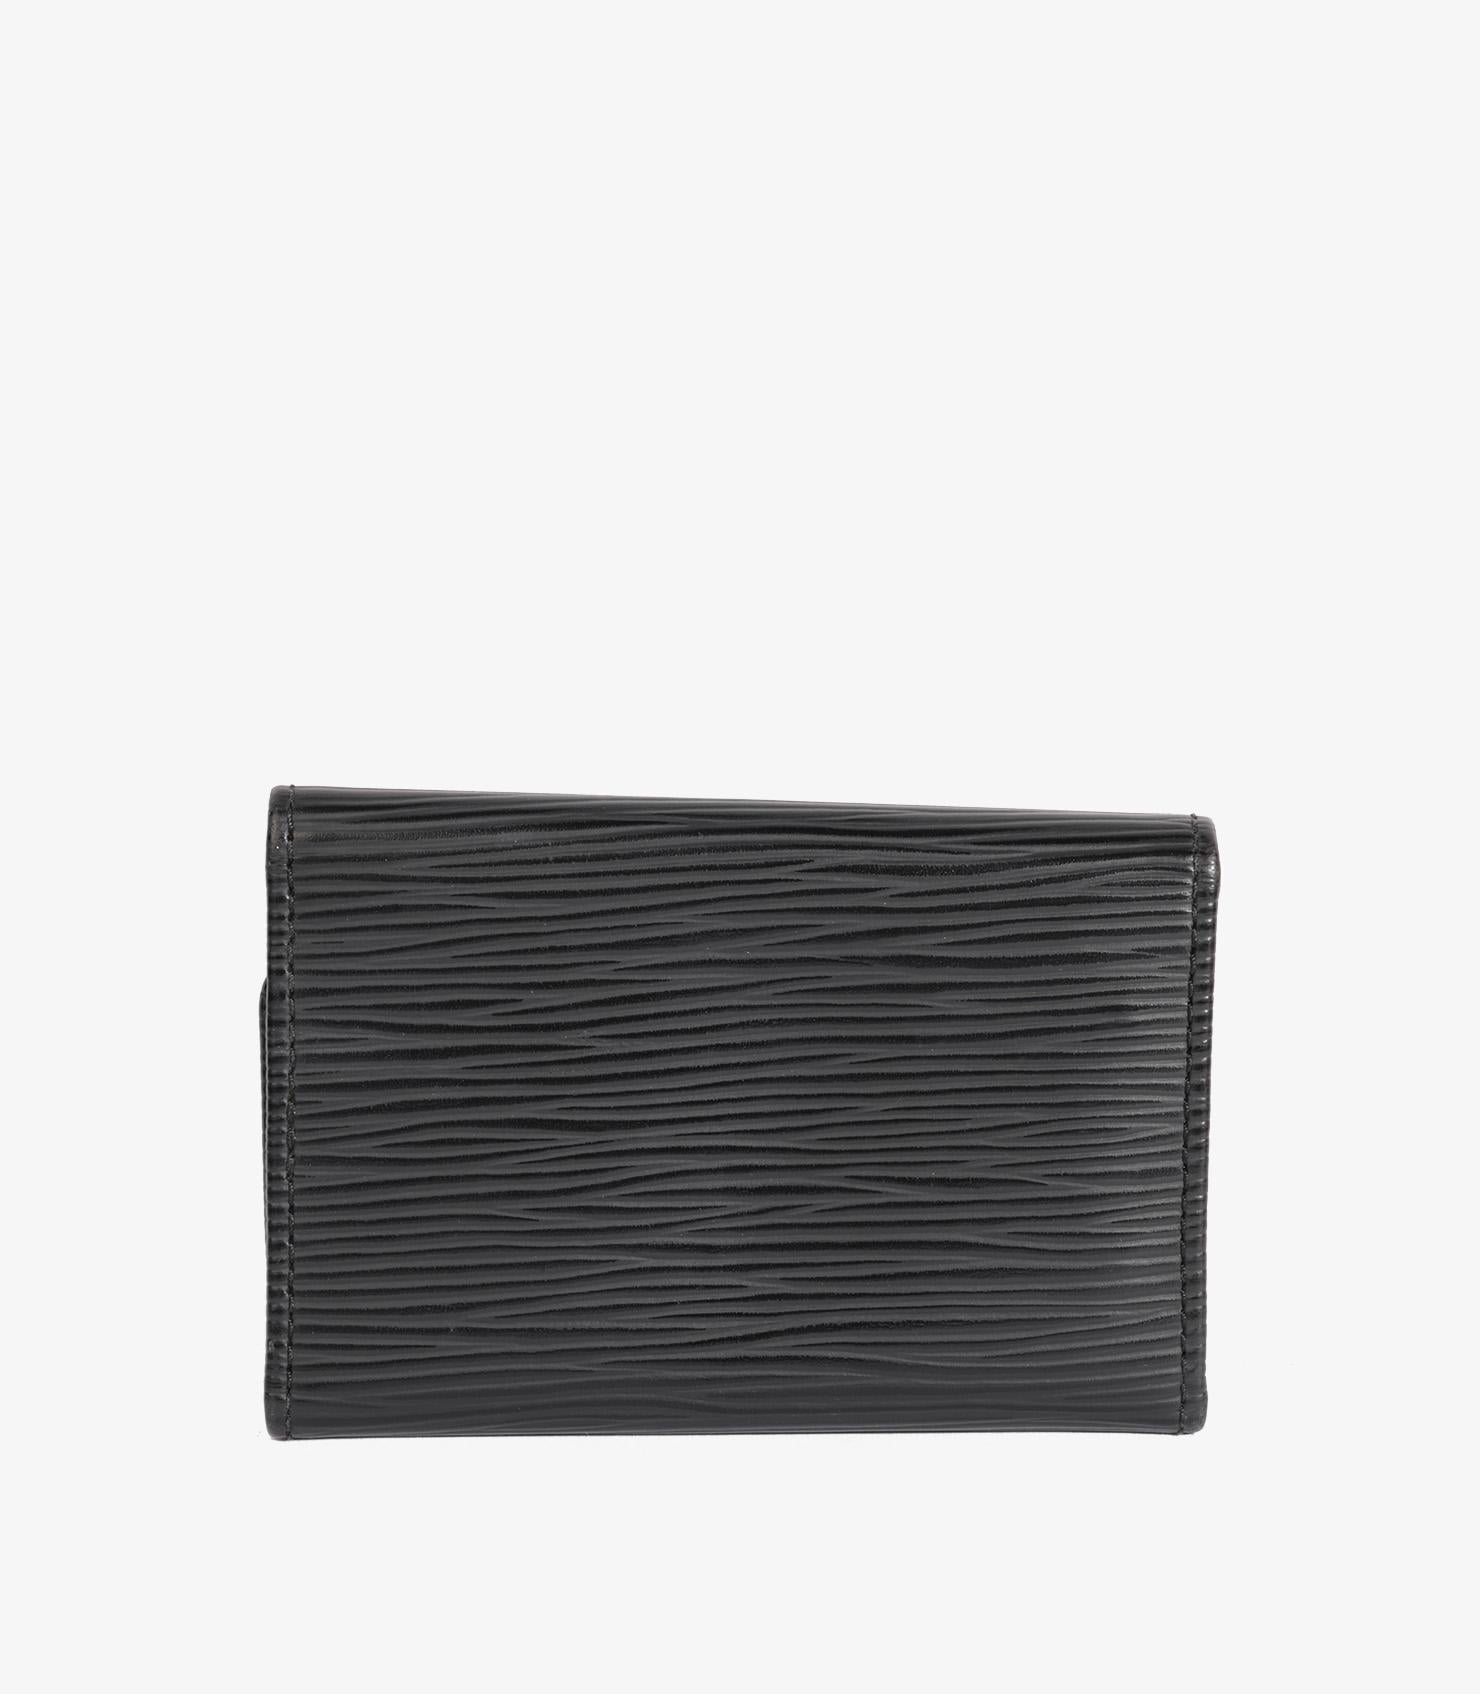 Louis Vuitton Black Epi Leather 6 Key Holder

Brand- Louis Vuitton
Model- Key Holder
Product Type- Key Pouch
Serial Number- CT*****
Age- Circa 2017
Colour- Black
Hardware- Silver
Material(s)- Epi Leather
Authenticity Details- Date Stamp

Height-